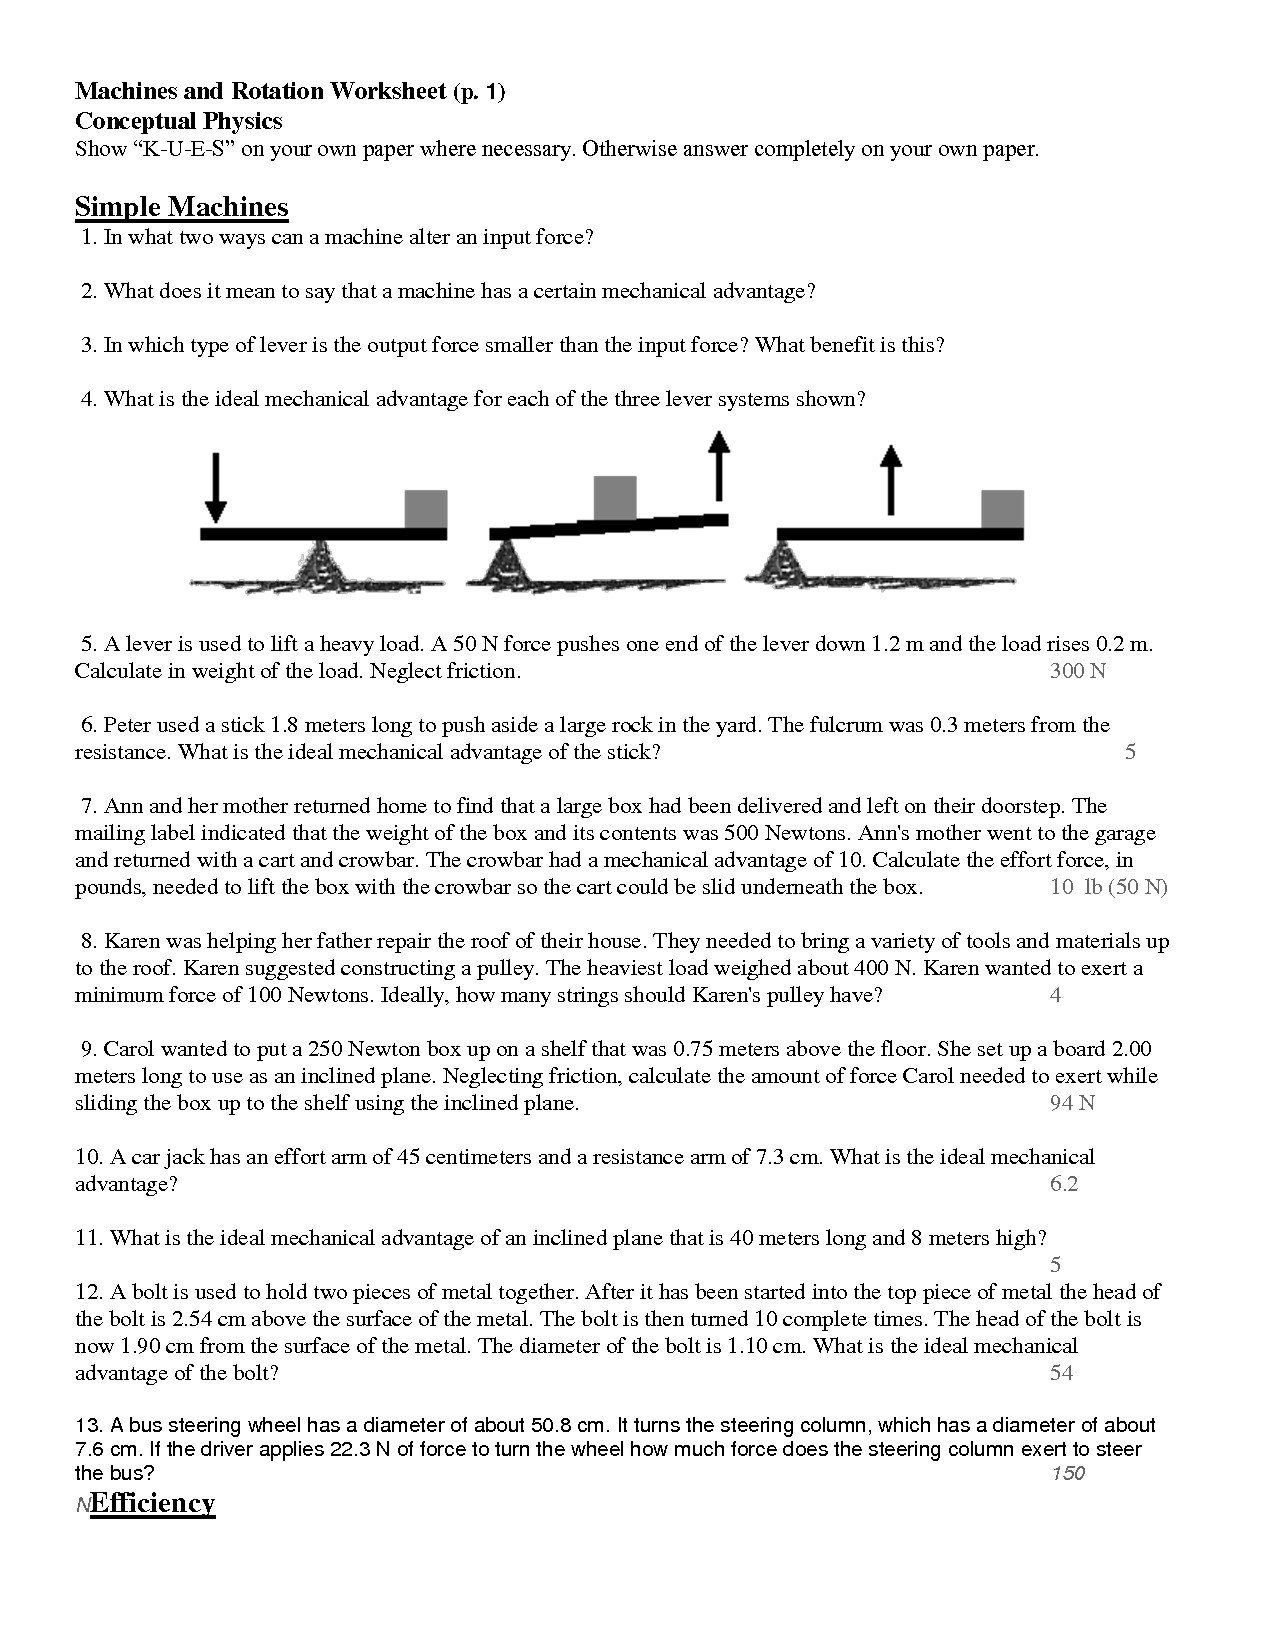 12-best-images-of-work-and-simple-machines-worksheet-answers-simple-machines-worksheet-simple